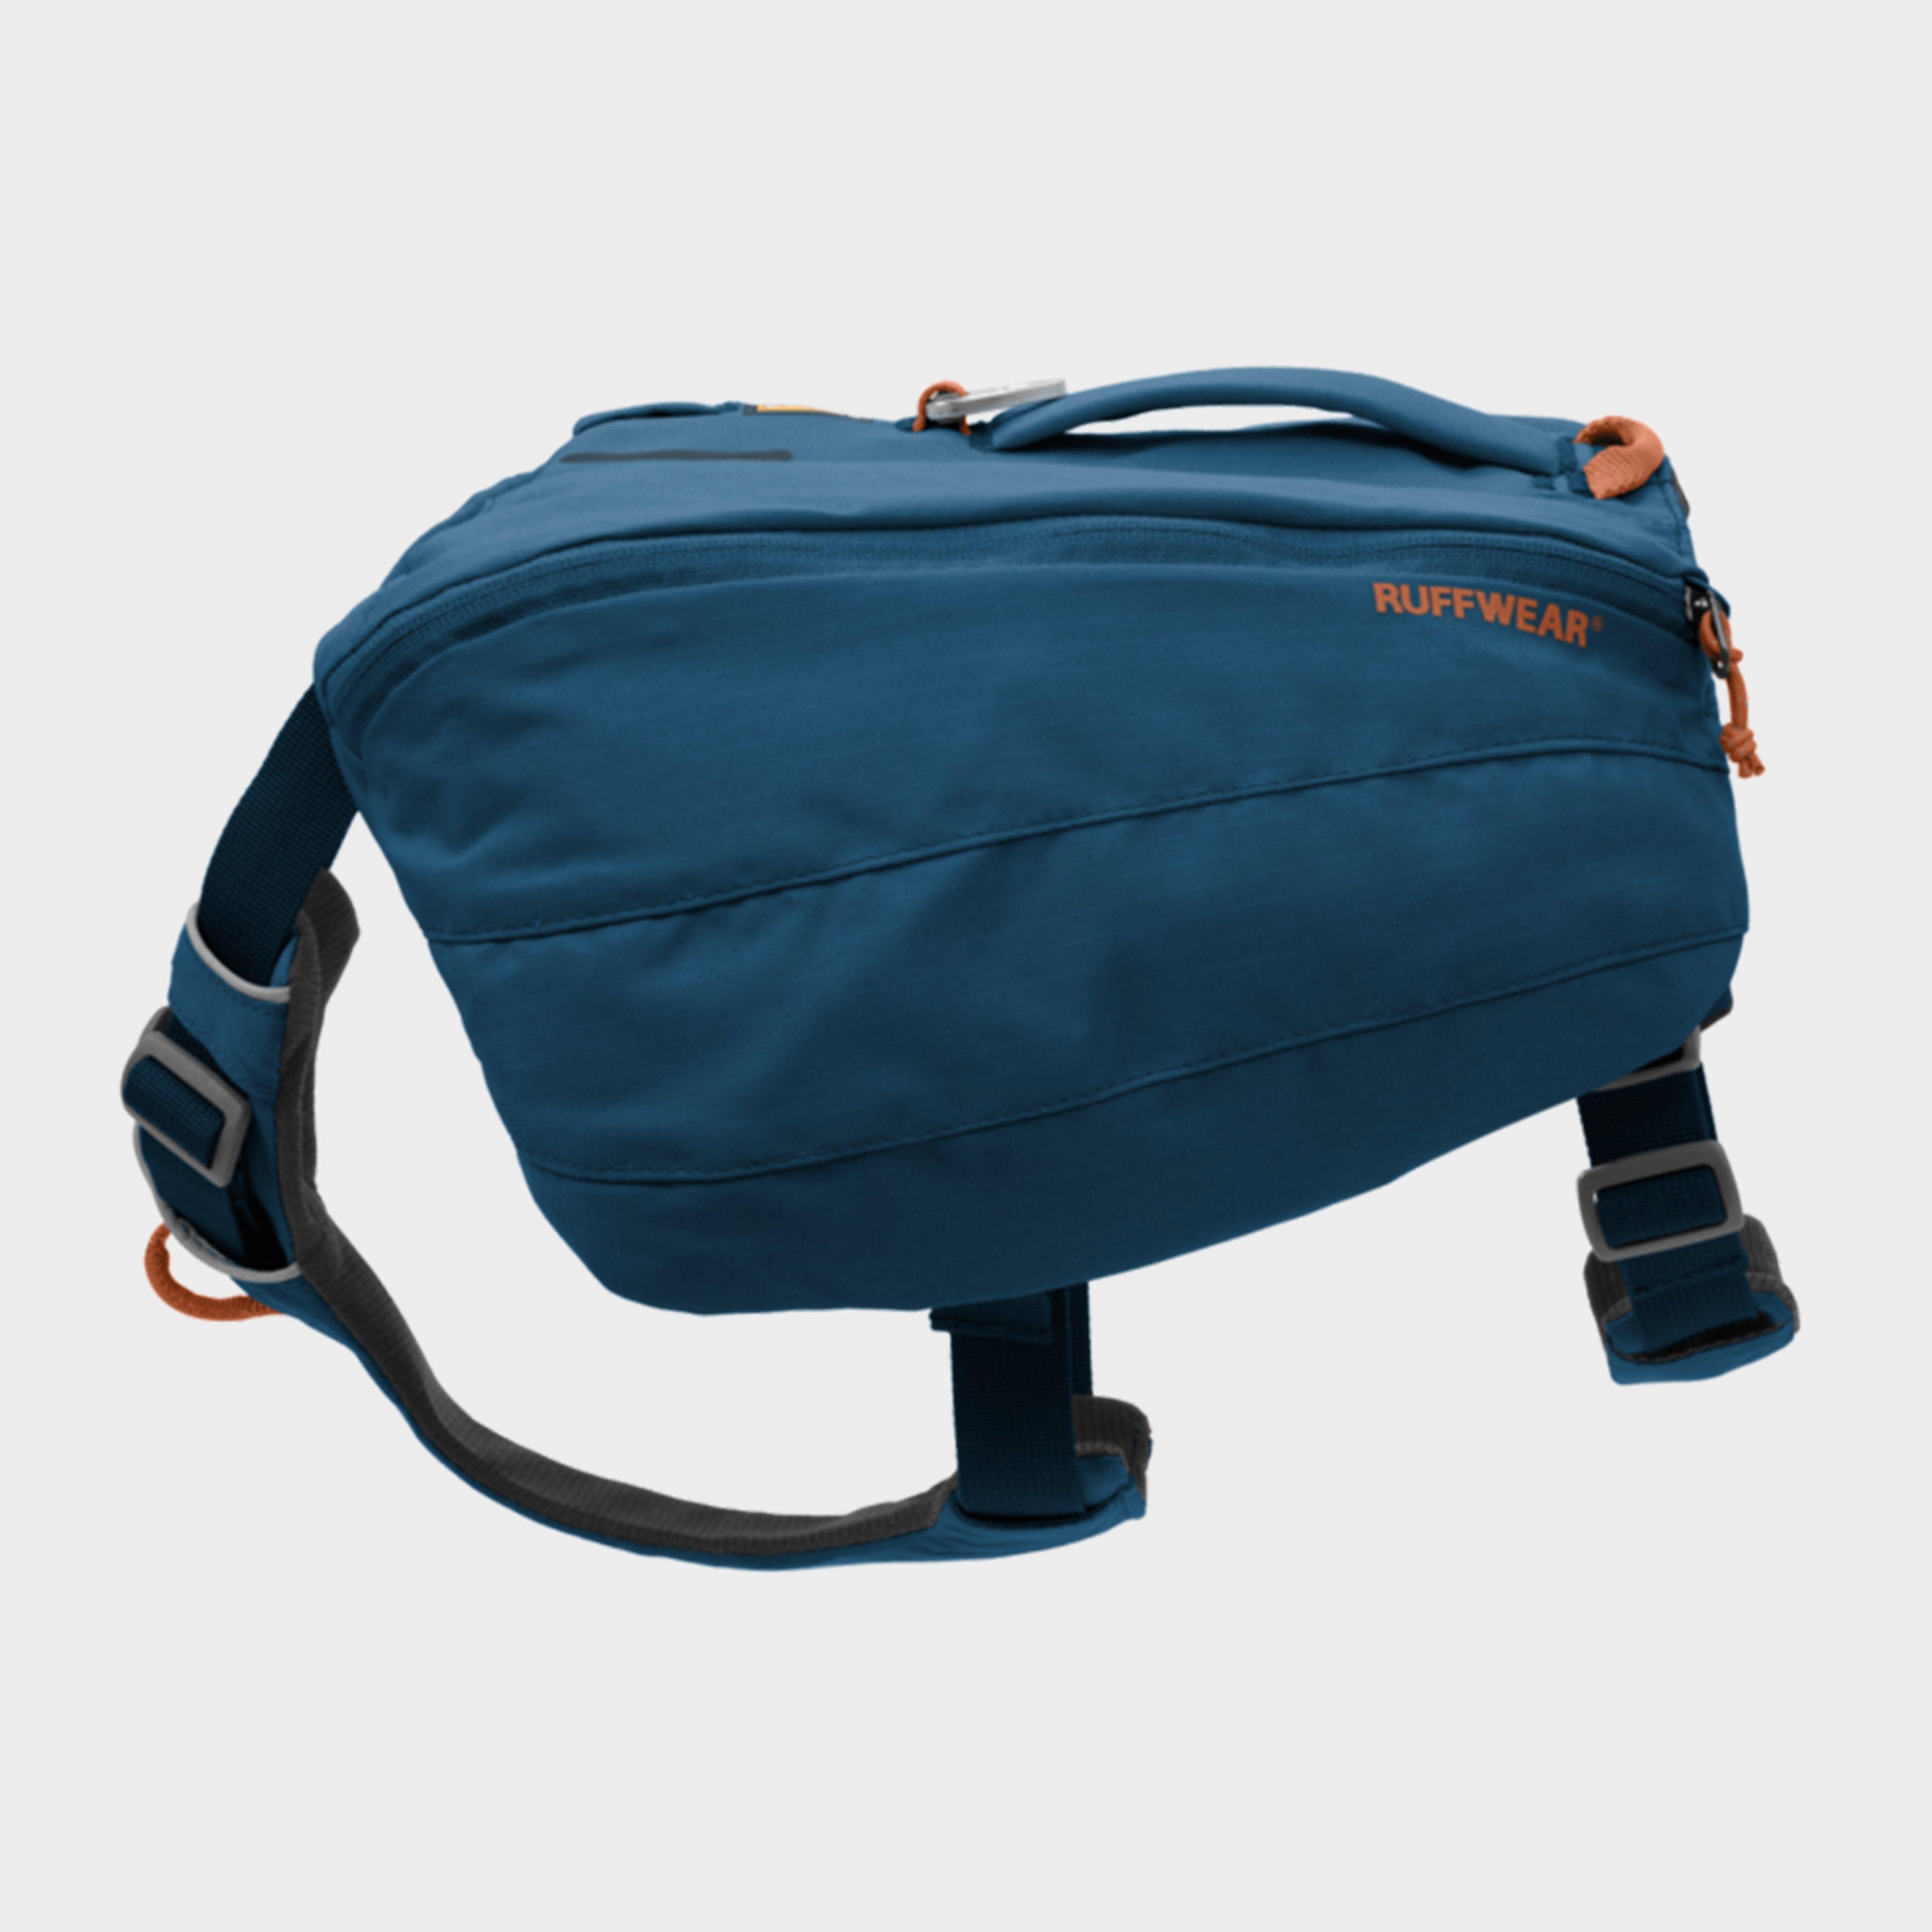 Image of Ruffwear Front Range Day Pack, Blue